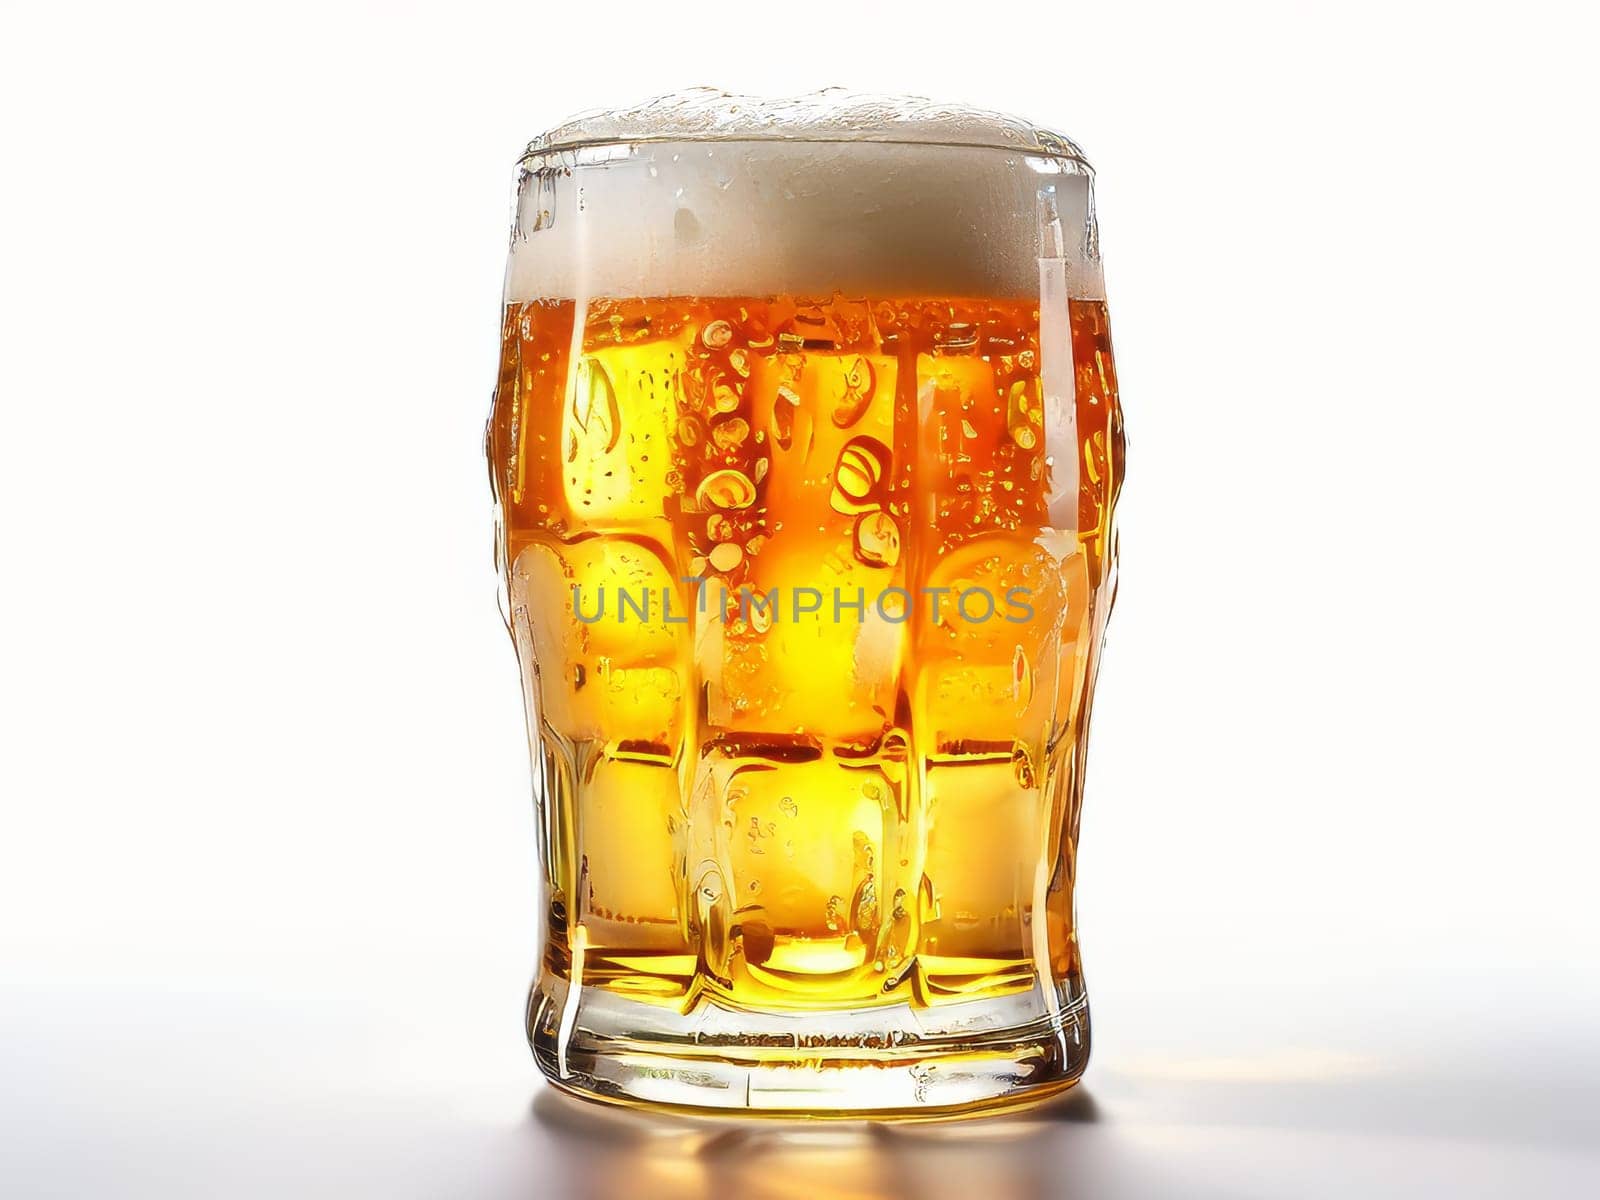 Beer glass mug isolated on white background. Perfect full glass of yellow beer with white foam, isolated on white background with clipping path